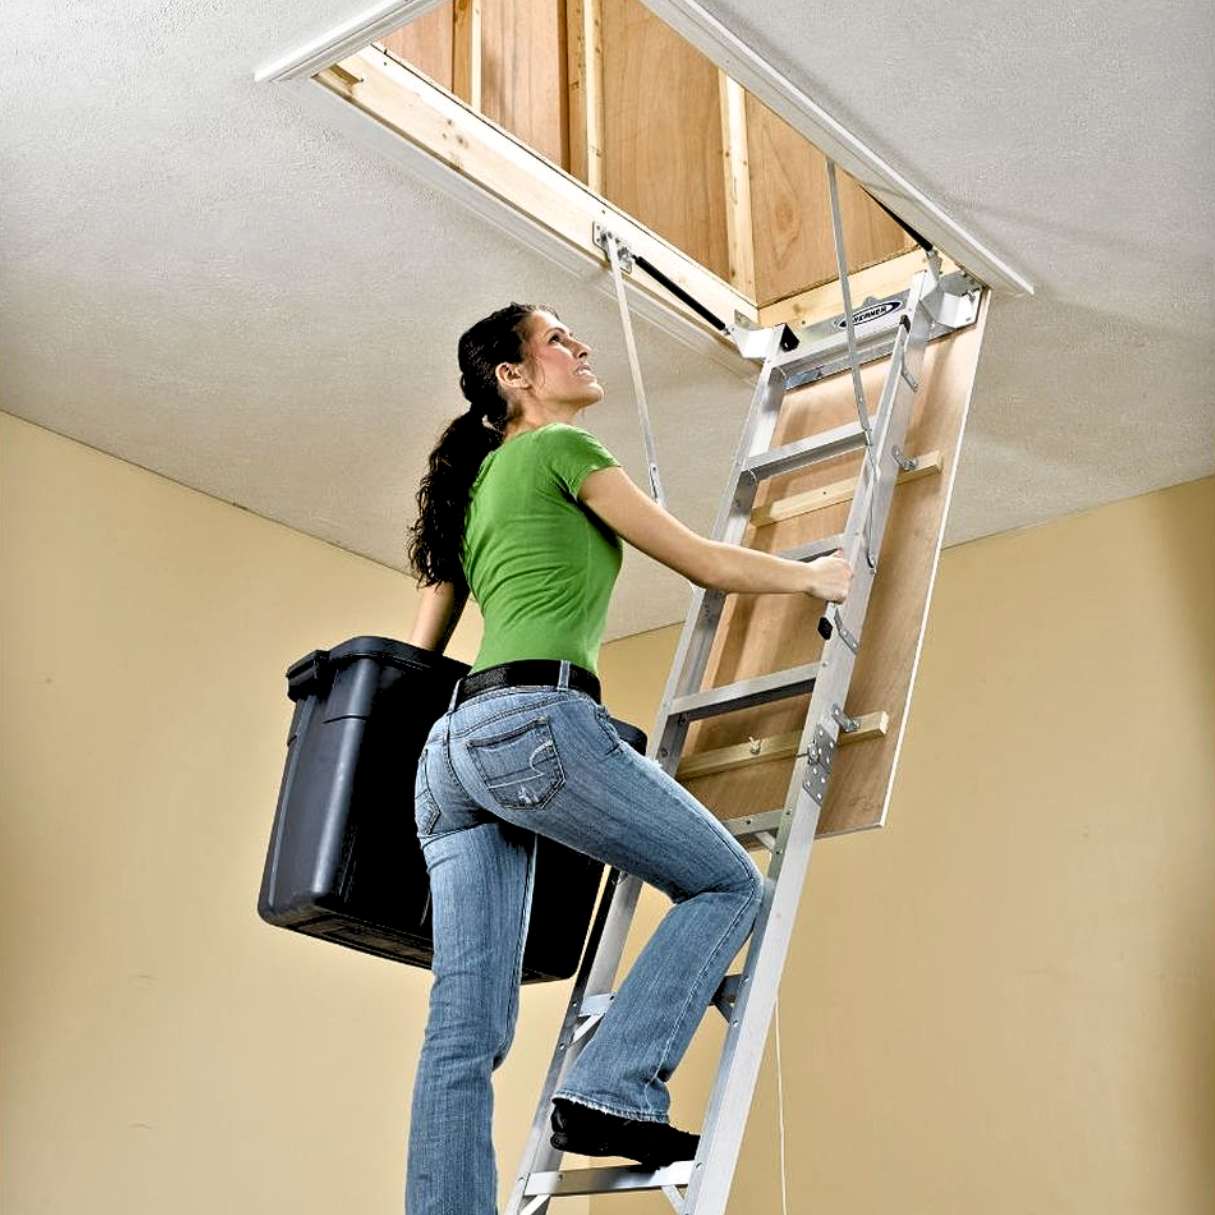 How To Insulate Attic Pull Down Stairs, Do It Yourself